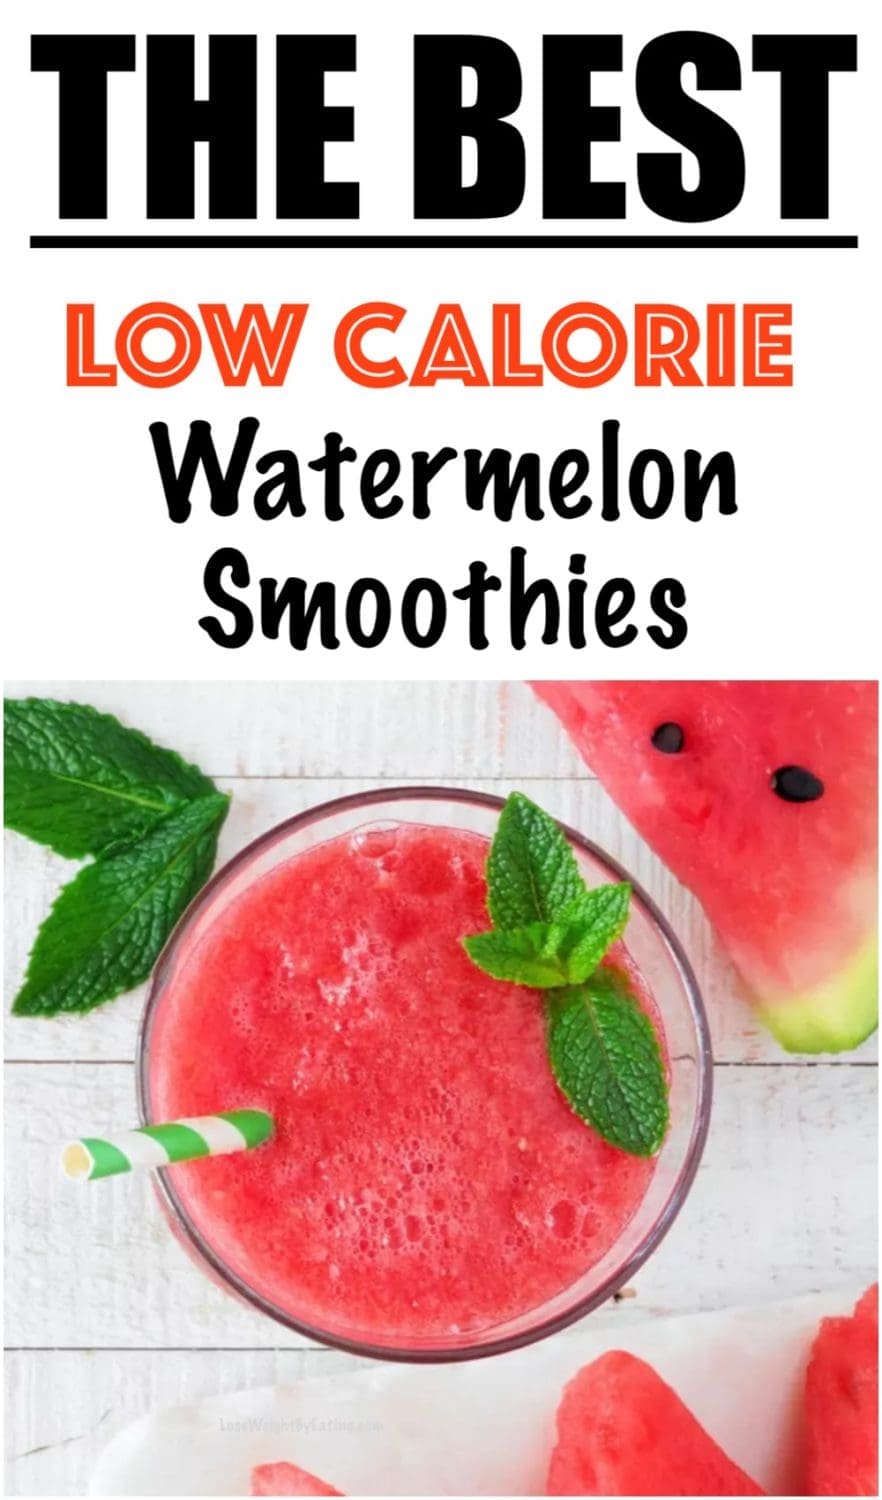 low calorie watermelon drinks and watermelon smoothies